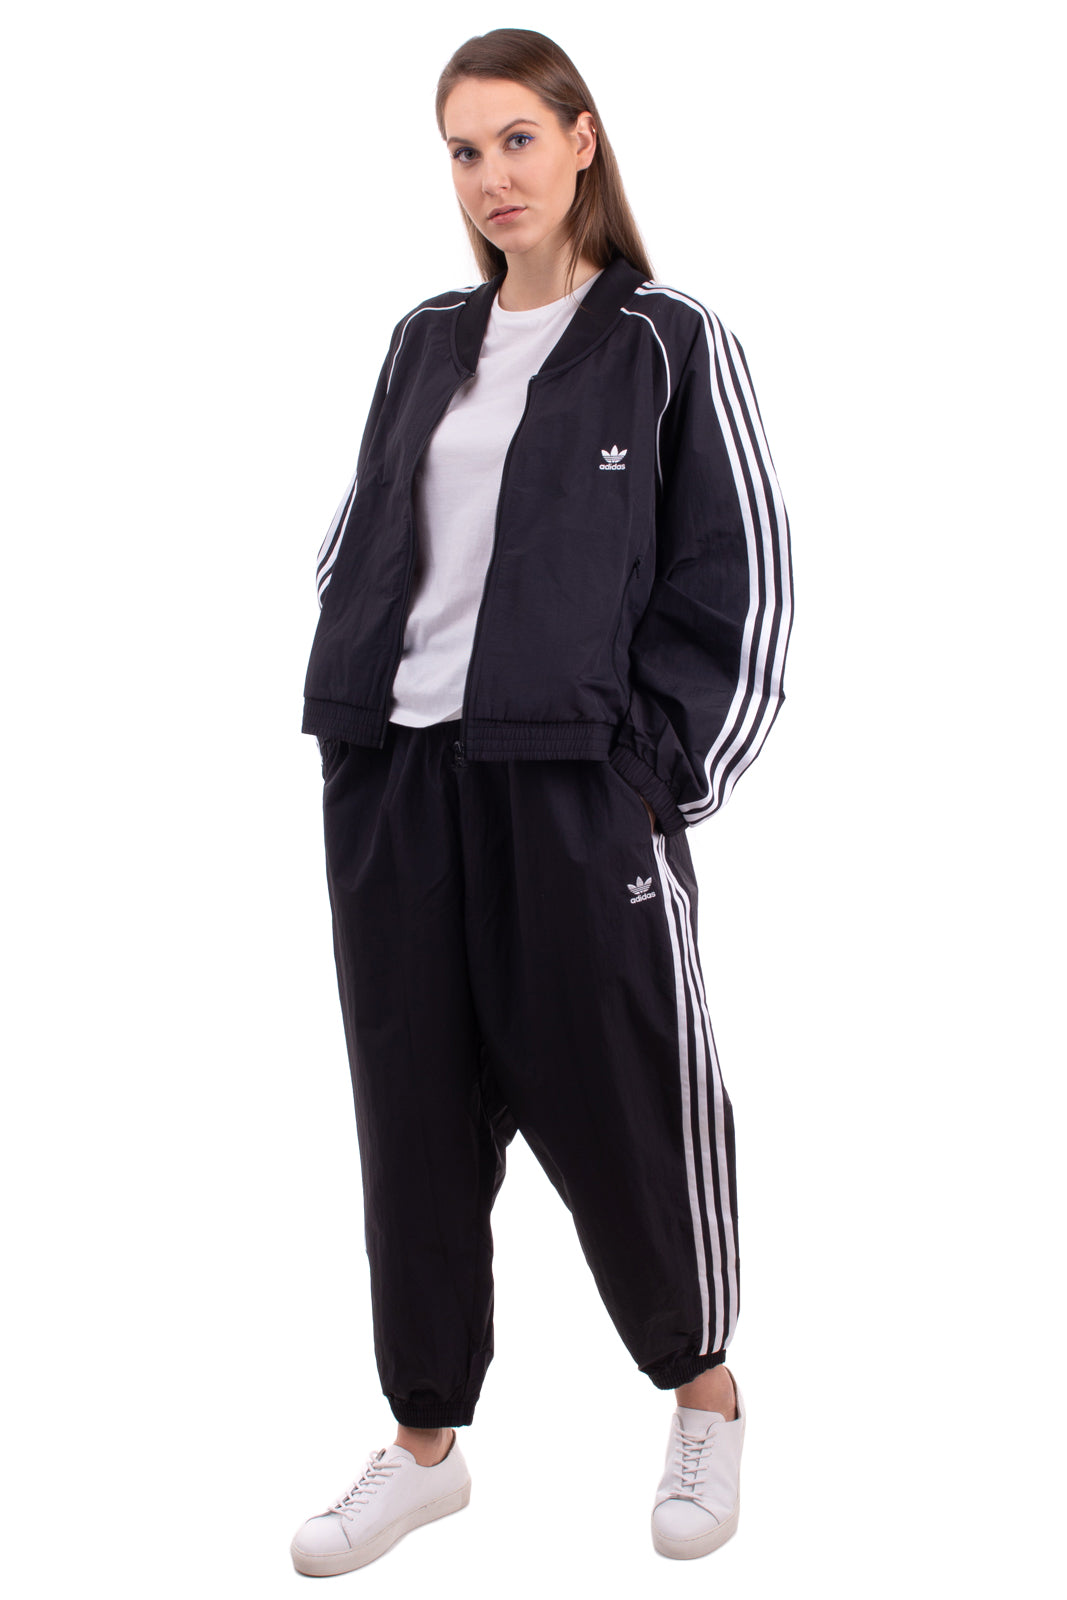 ADIDAS ORIGINALS PRIMEGREEN Track Trousers Plus Size 4X Mesh Lined Double Waist gallery main photo